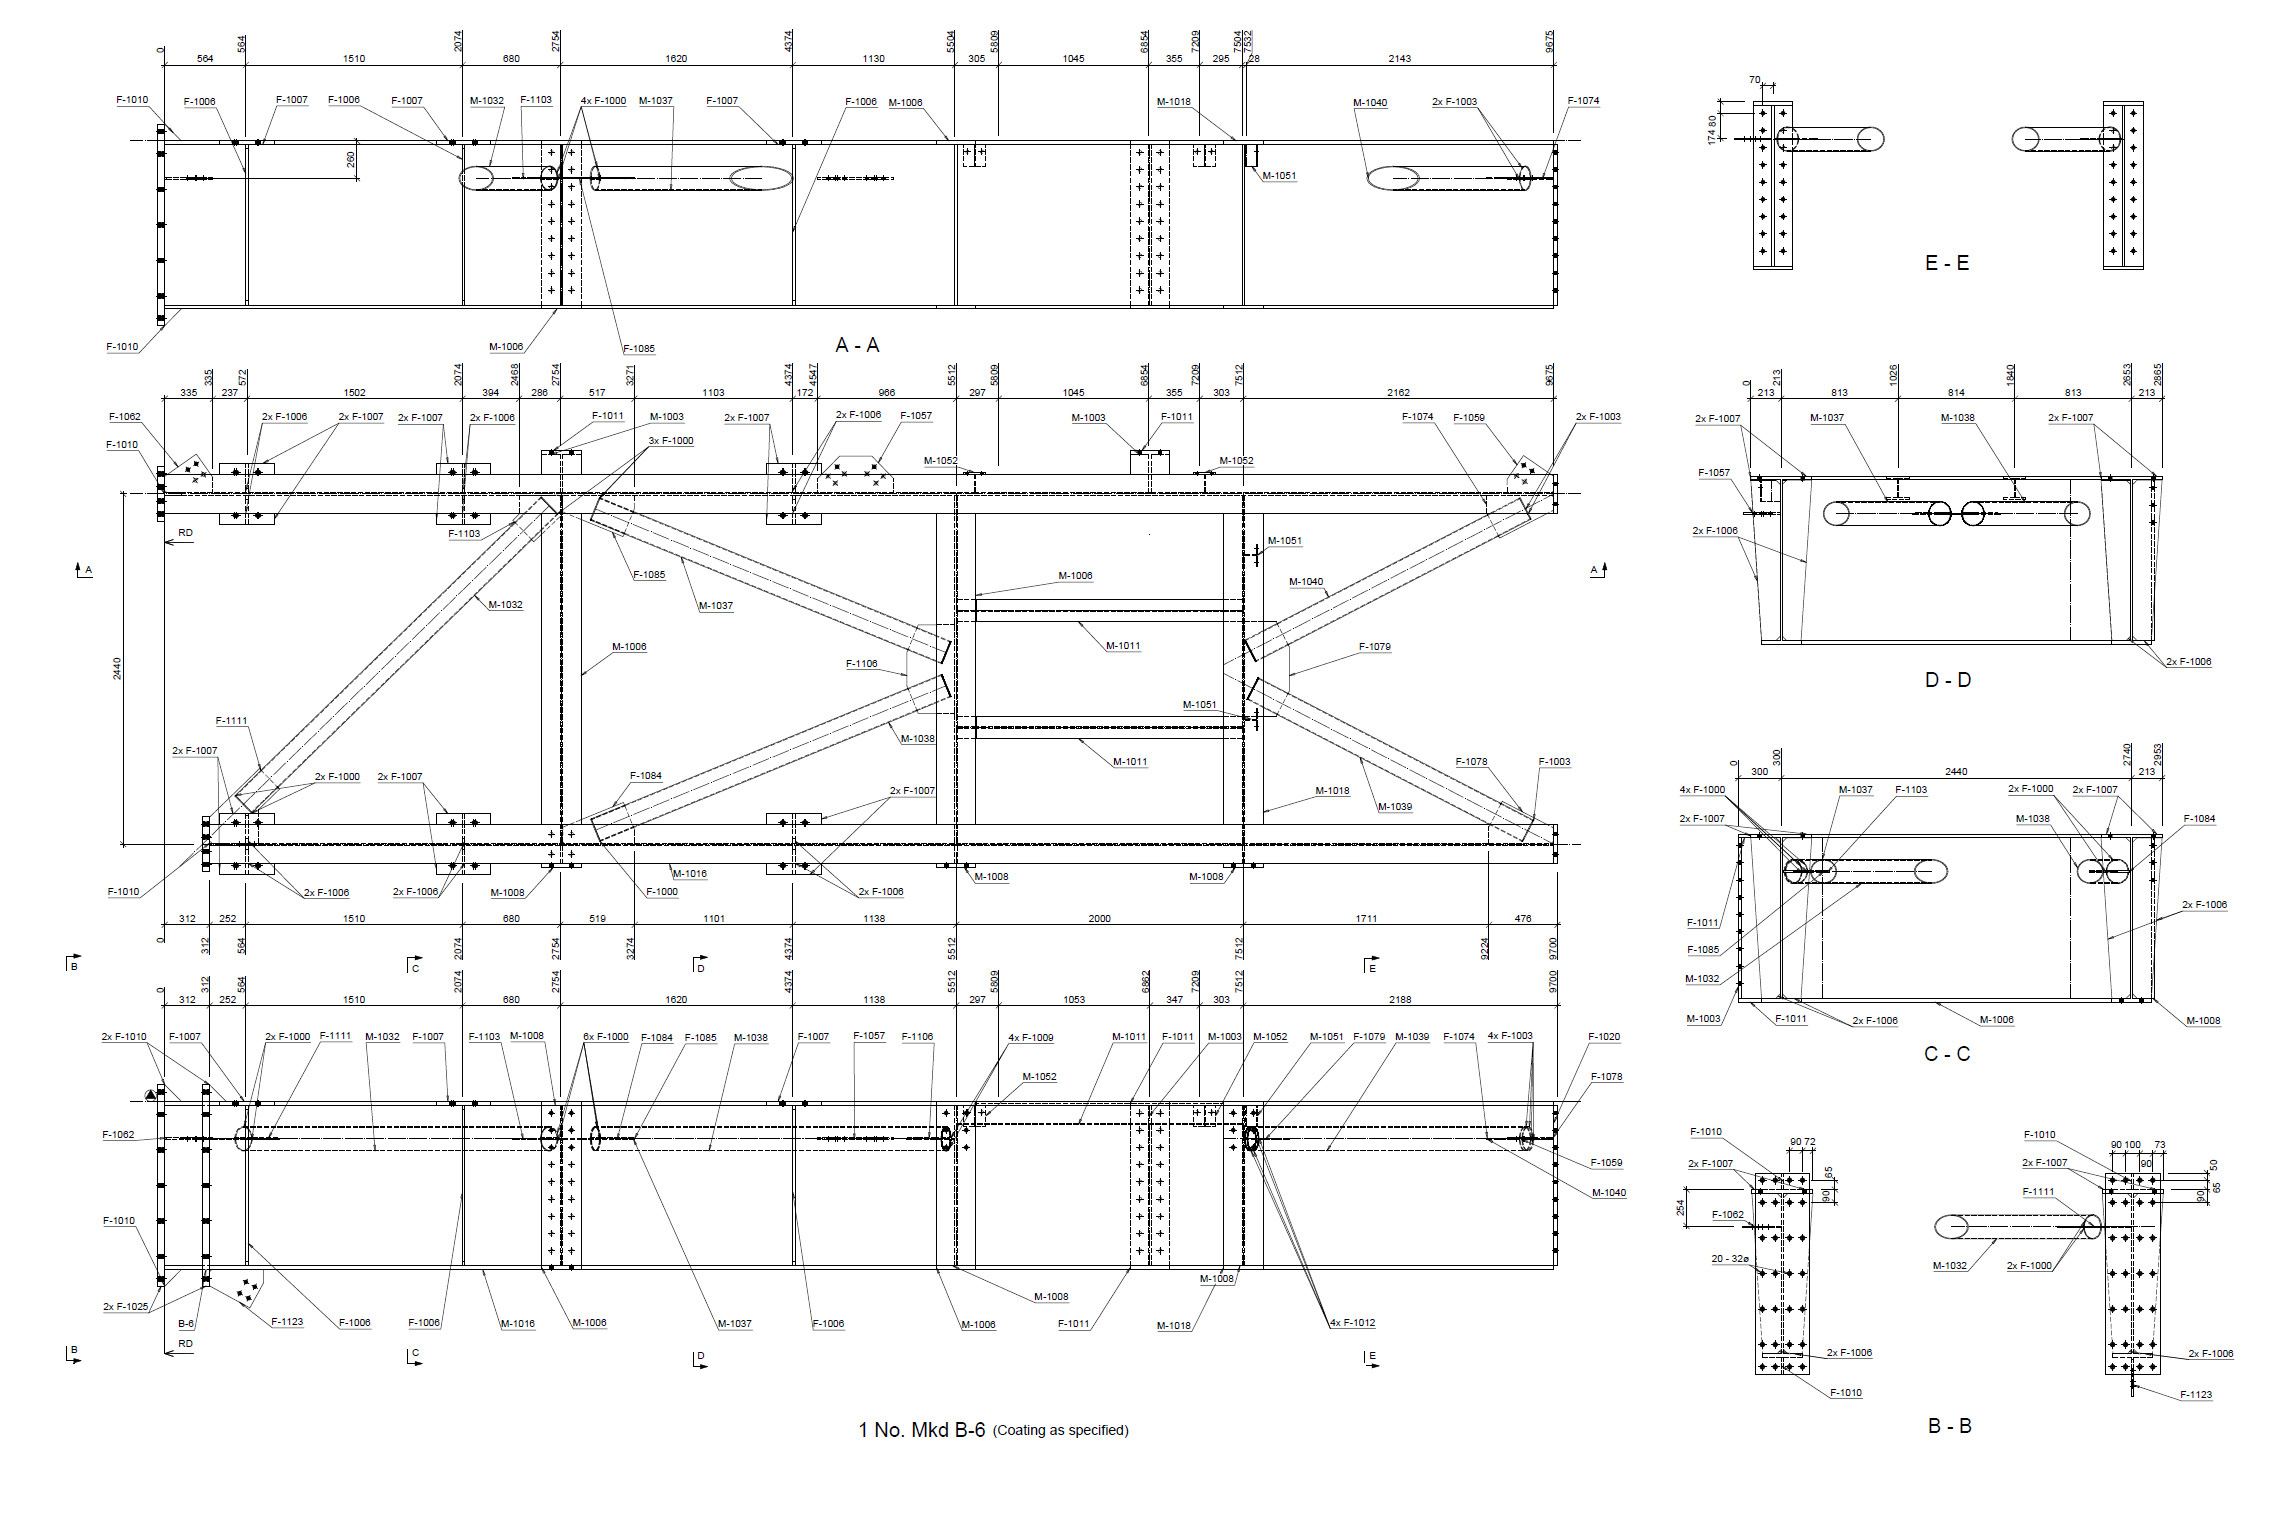 Cadeli - CAD Design - Structural Design, Analysis and shop drawings for